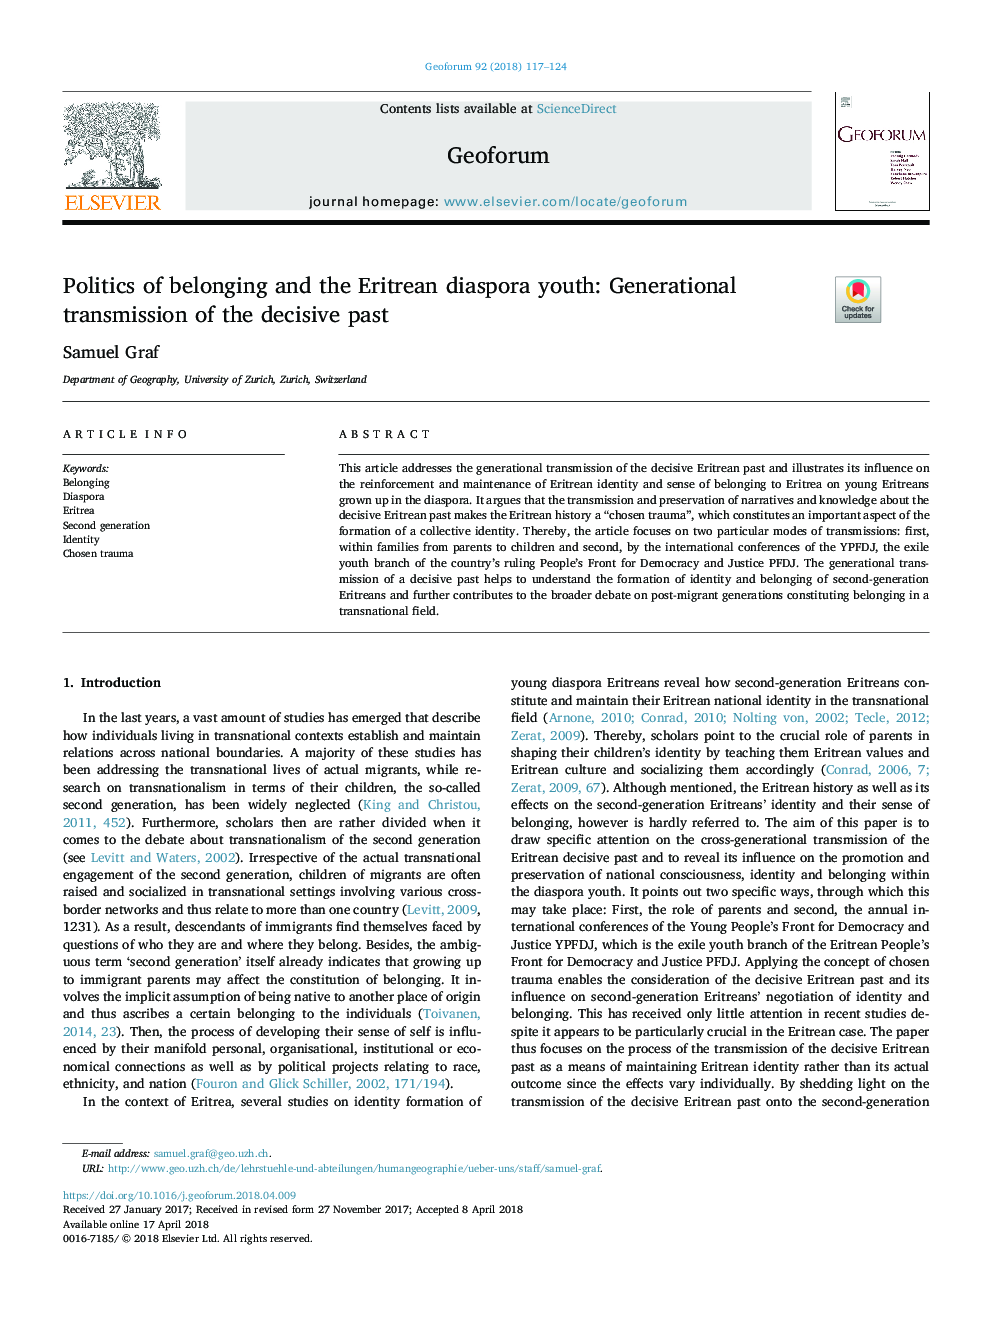 Politics of belonging and the Eritrean diaspora youth: Generational transmission of the decisive past